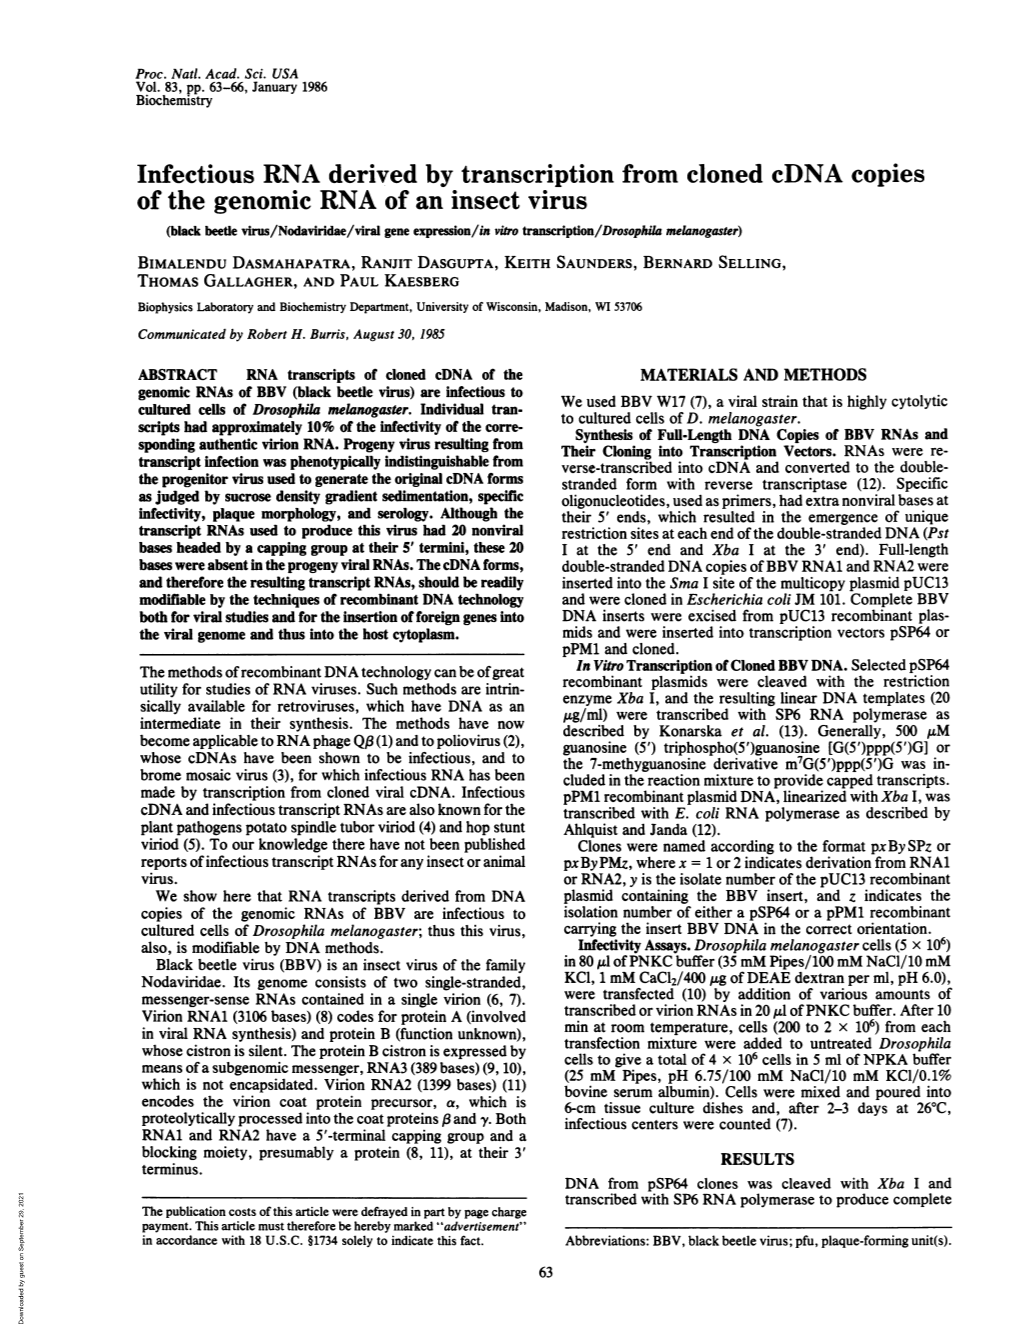 Infectious RNA Derived by Transcription from Cloned Cdna Copies of the Genomic RNA of an Insect Virus